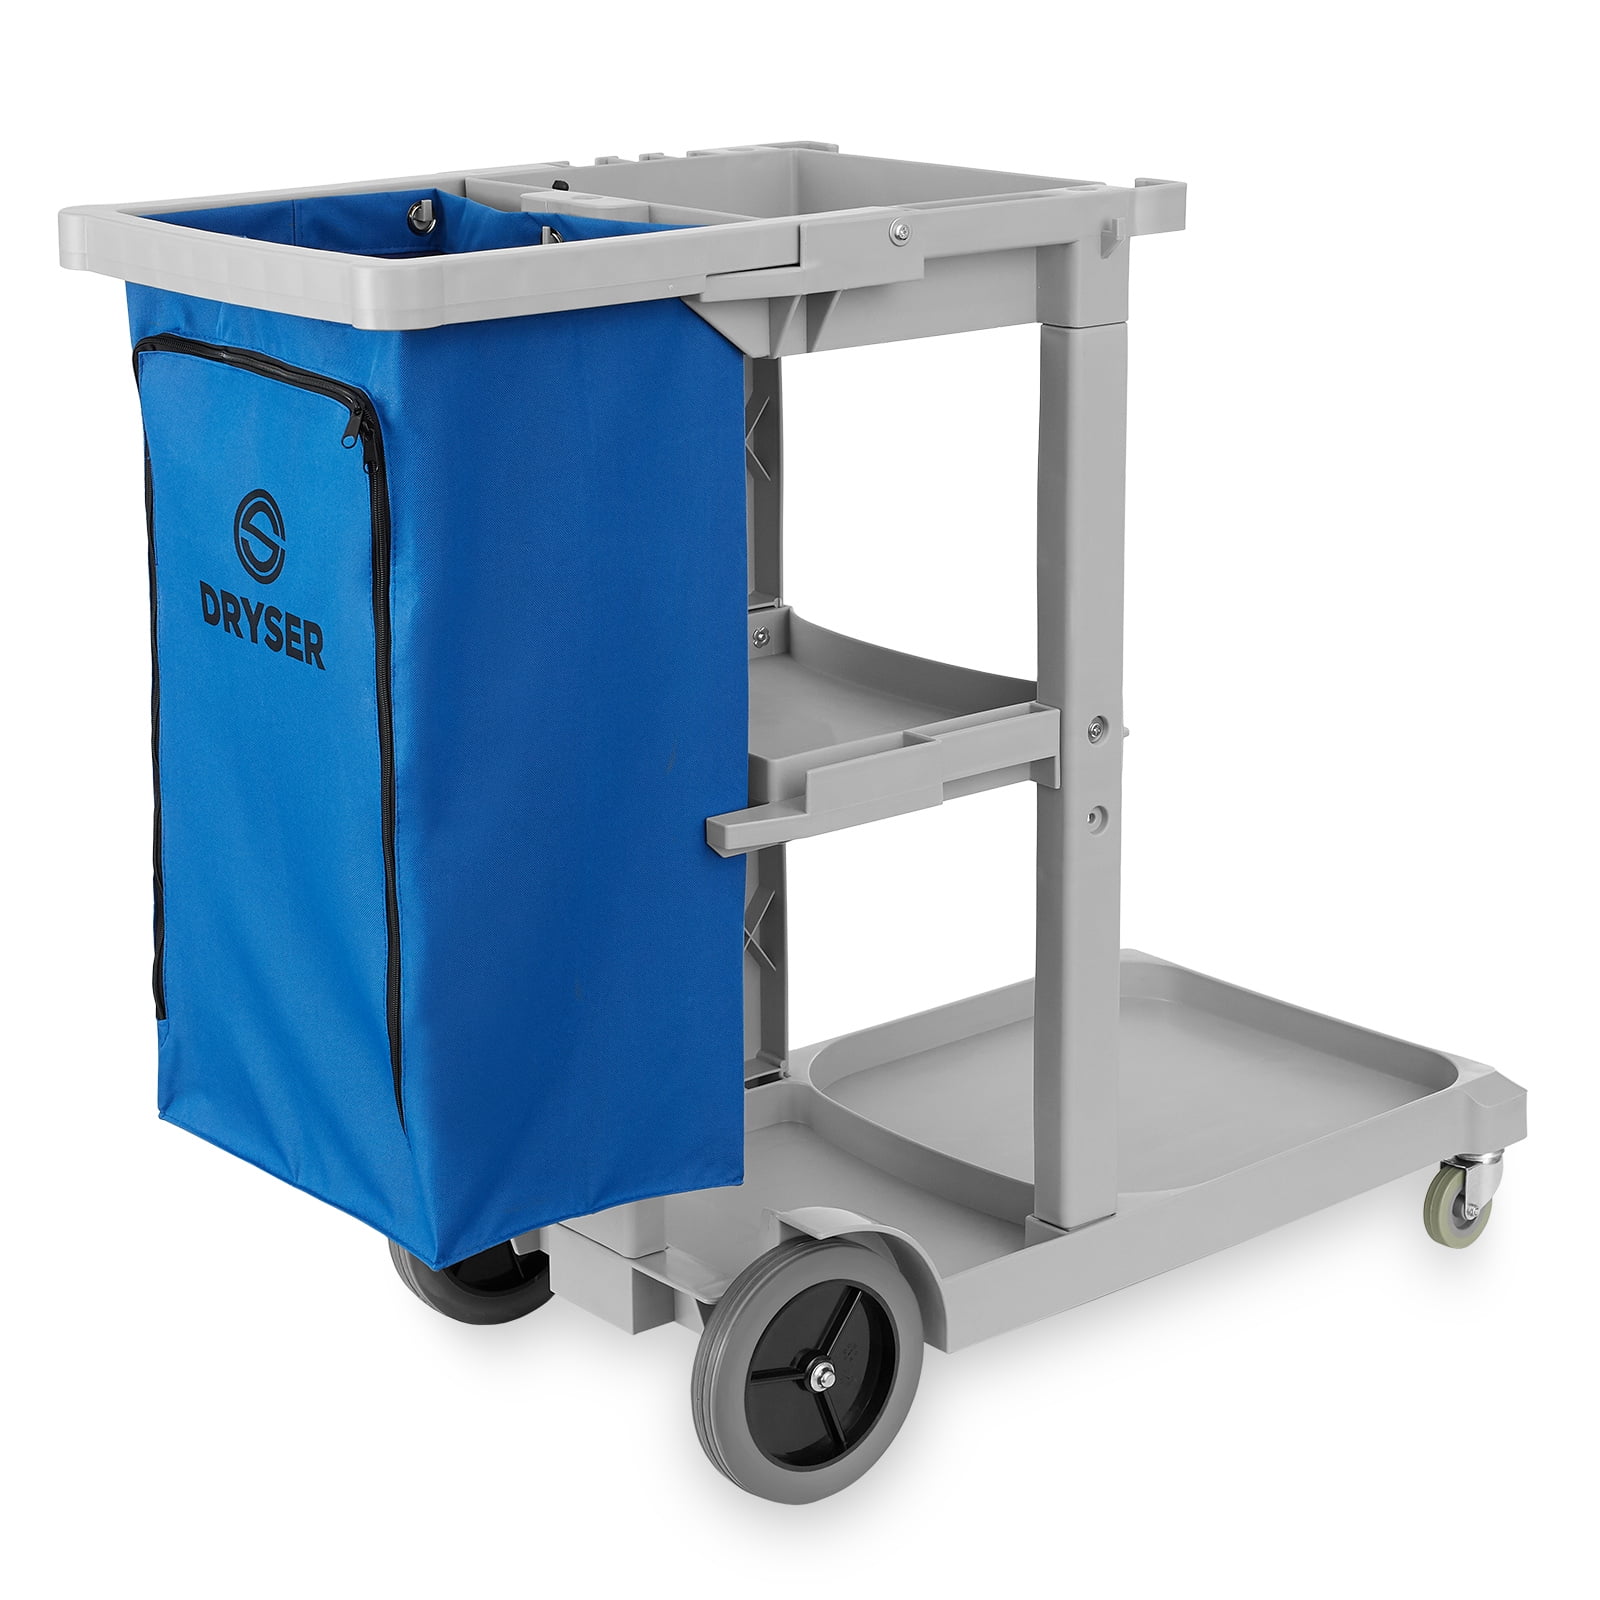 1053 Caddy Box for Janitorial Cart